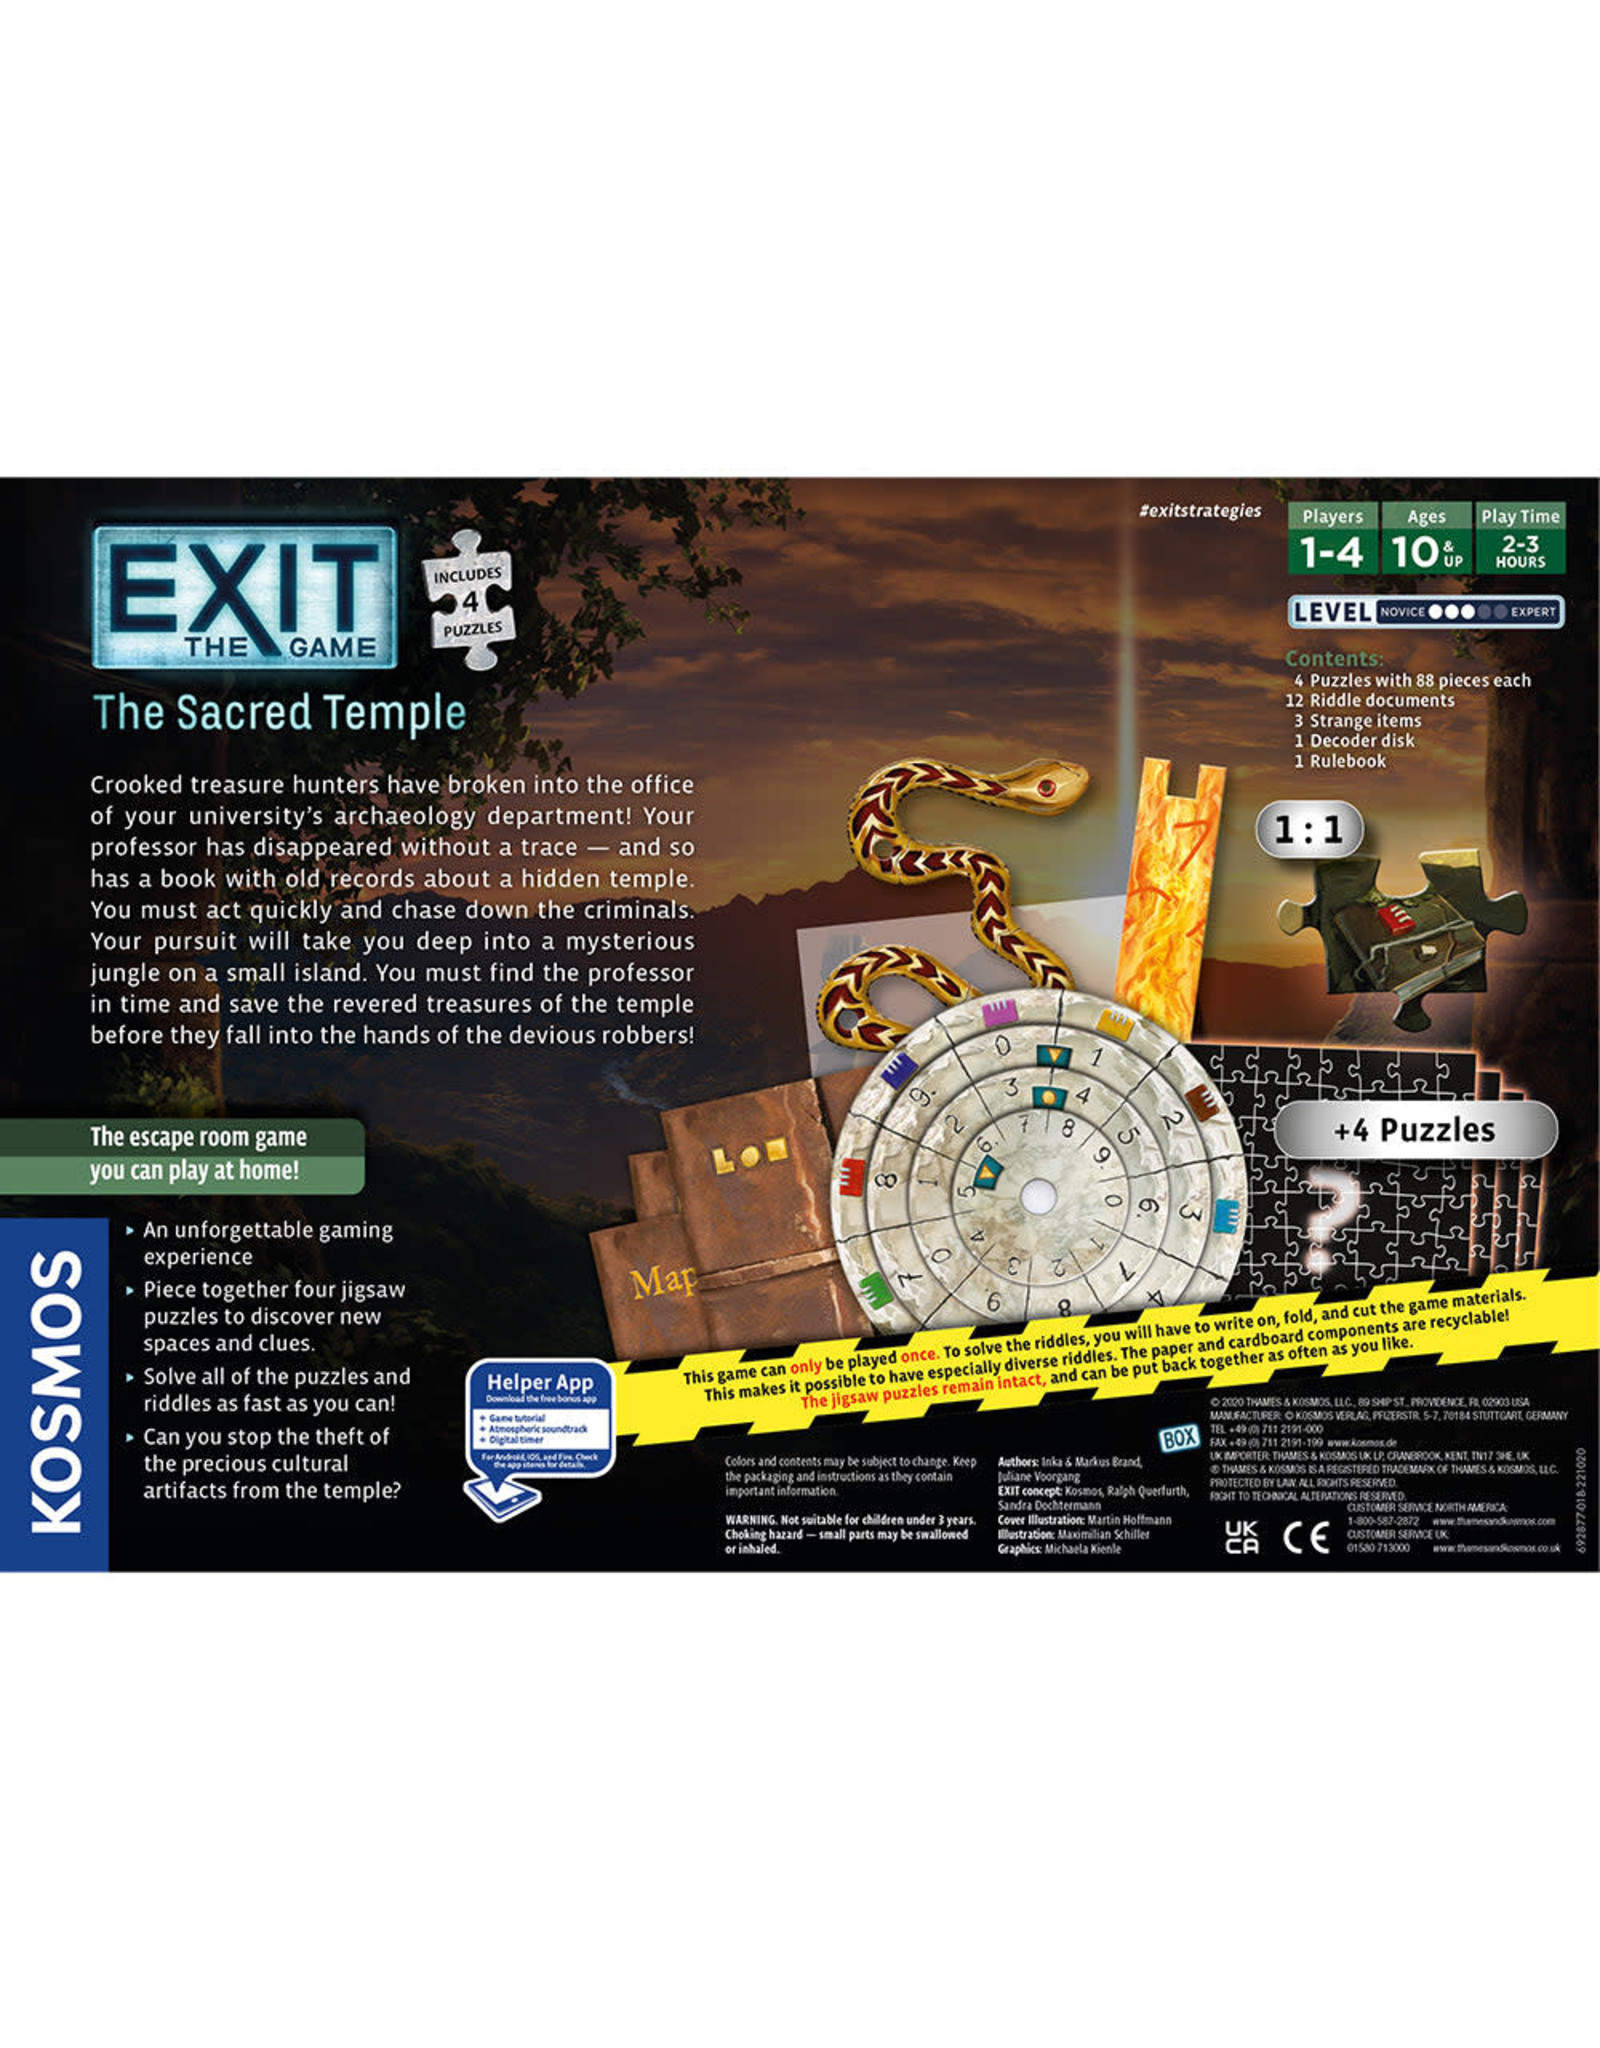 Thames & Kosmos EXIT: The Sacred Temple Game and Puzzles